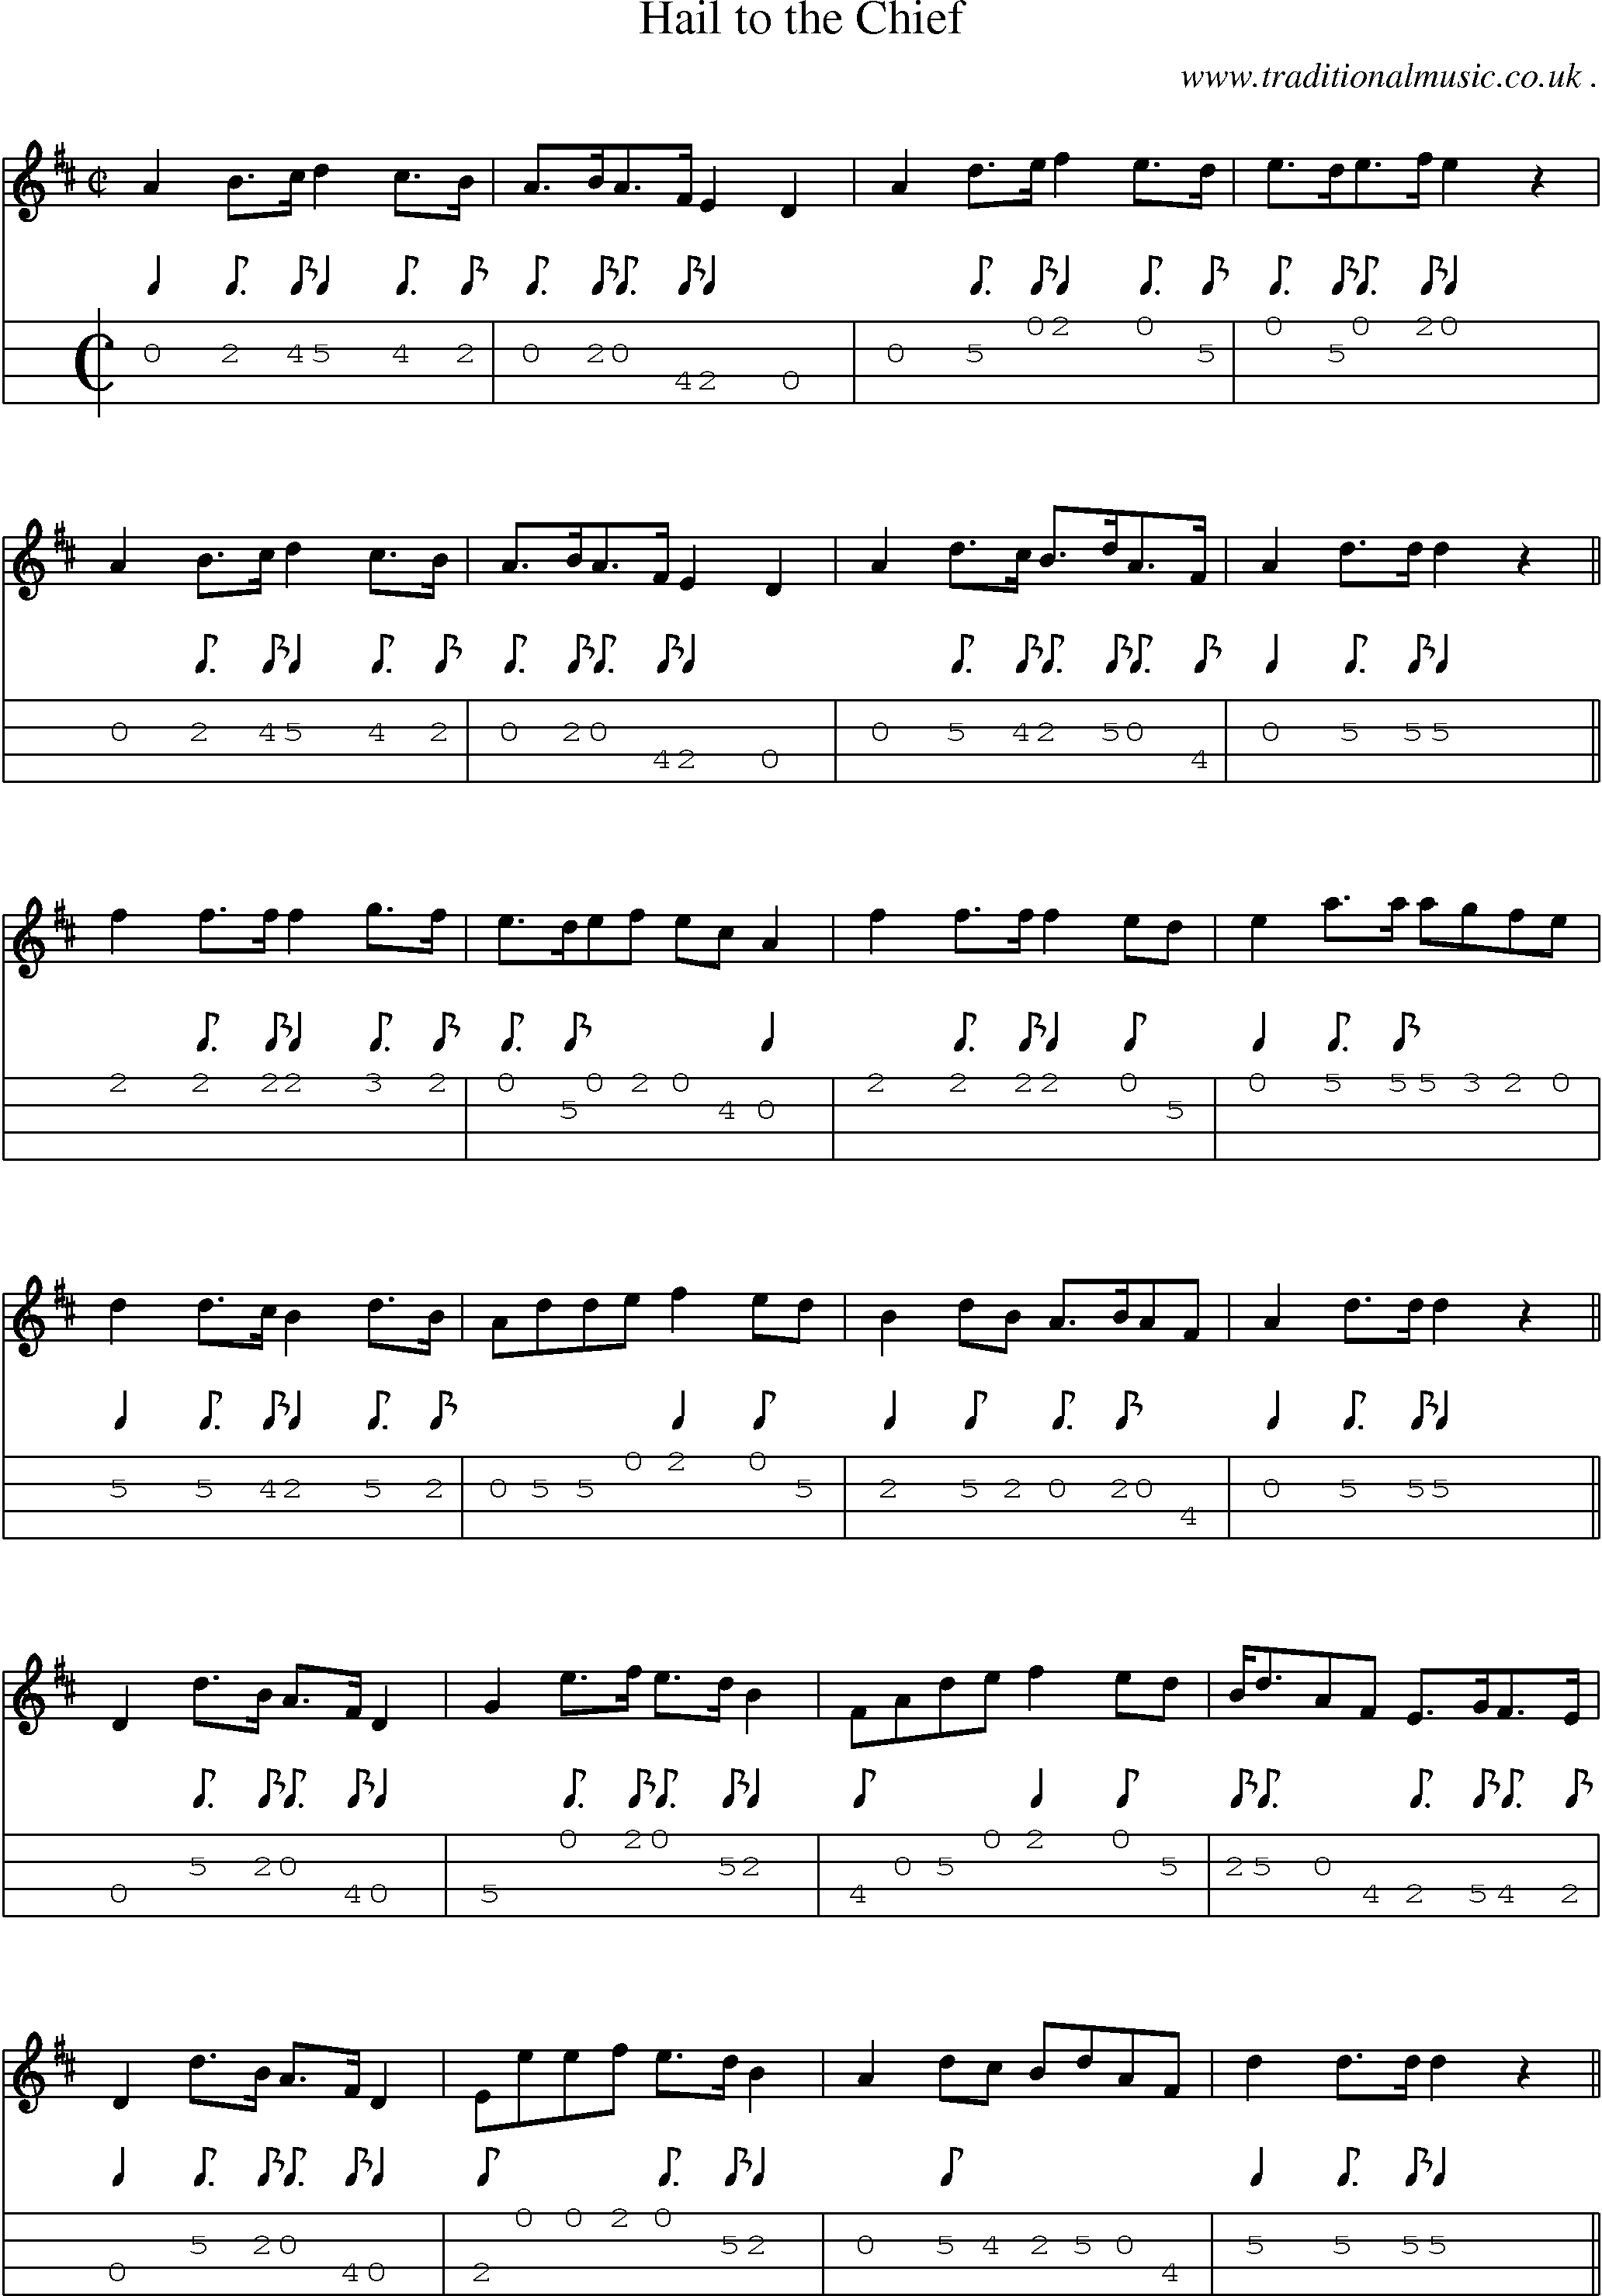 Music Score and Mandolin Tabs for Hail To The Chief